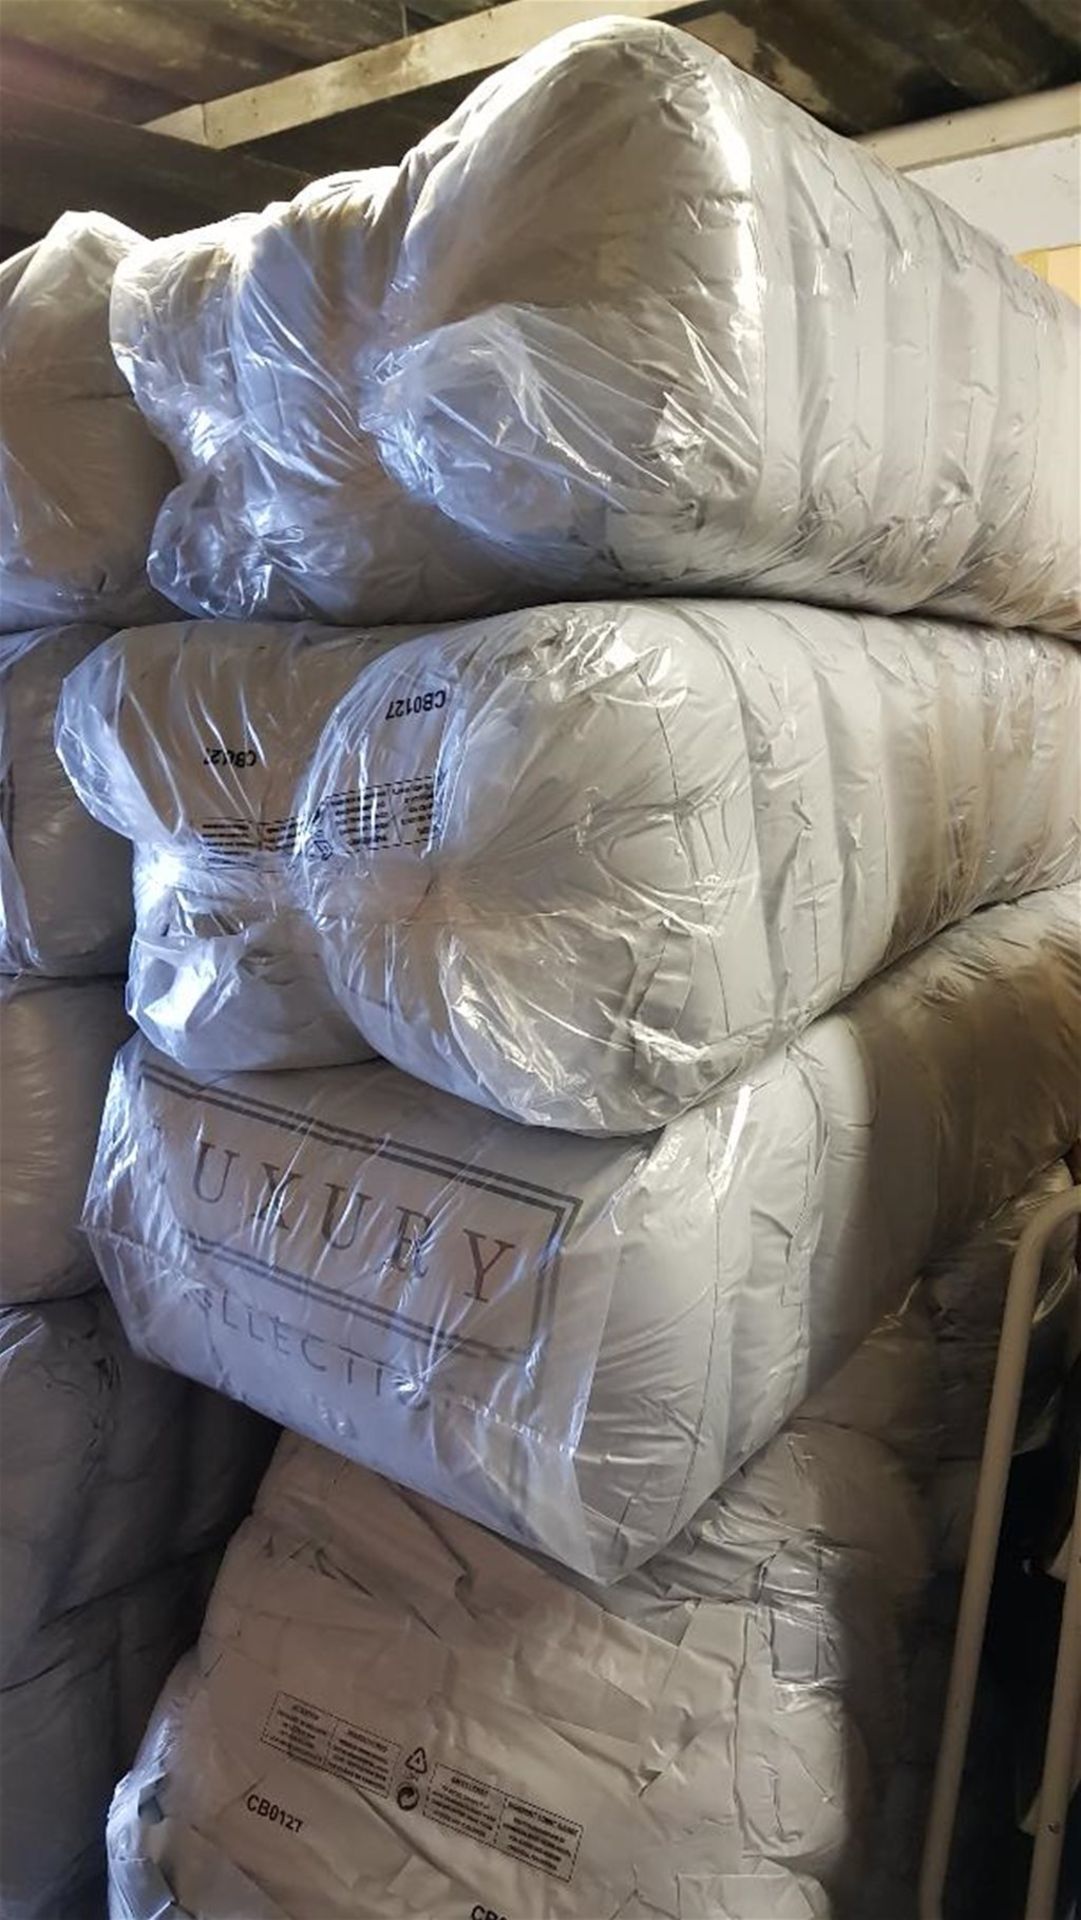 Whole Bale Containing 10 Packs Each Of 2 X Pillows (20 Pillows In Total) - Image 3 of 3